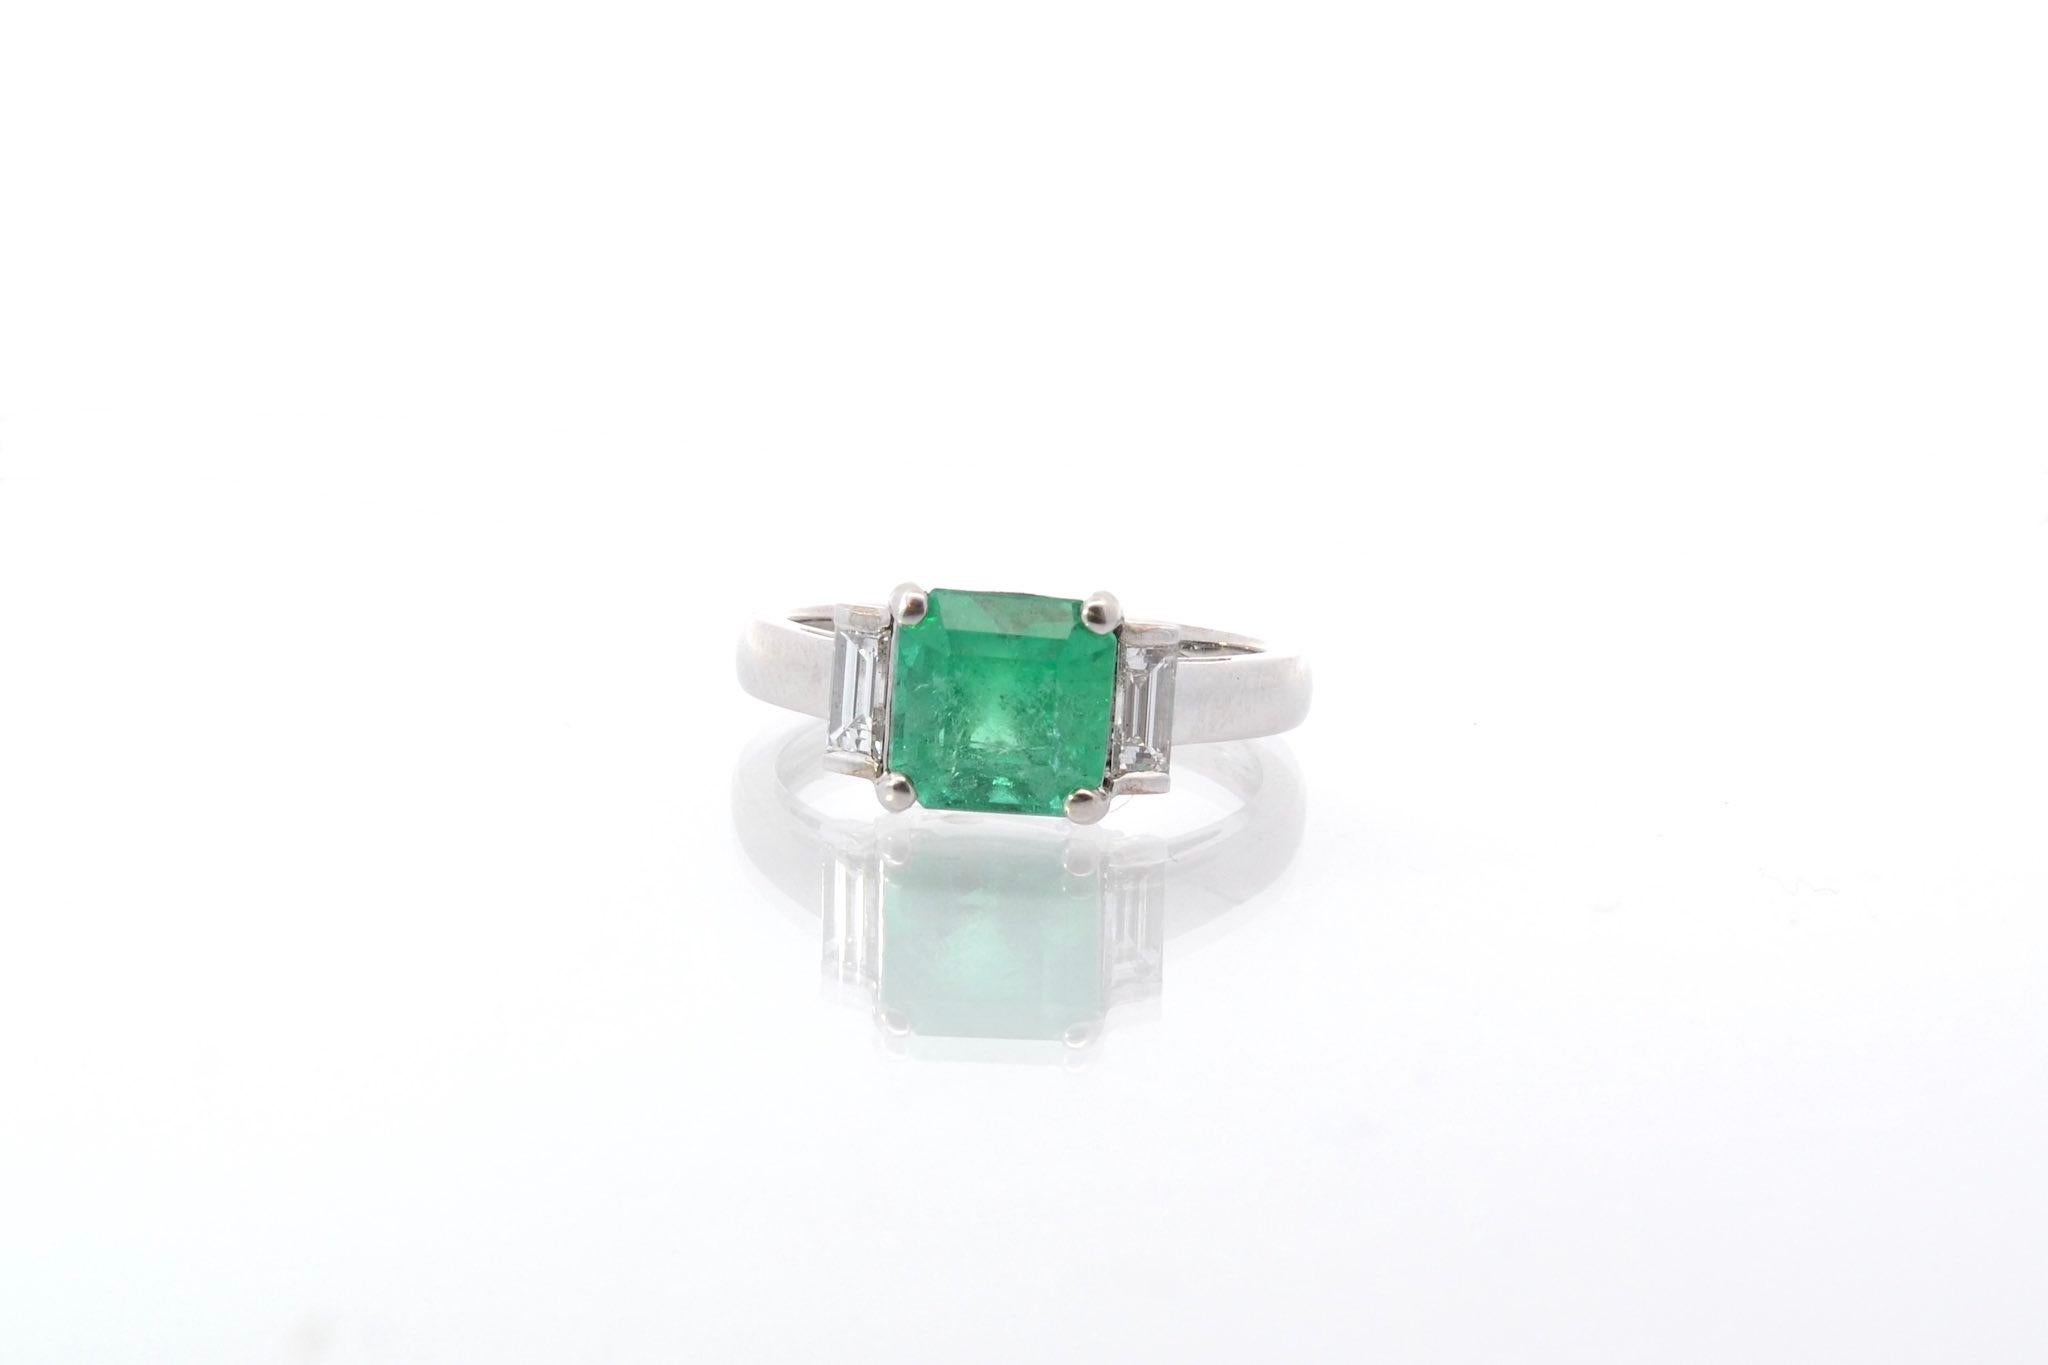 Stones: Emerald: 2.03 cts and 2 baguette diamonds: 0.30 ct
Material: 18k white gold
Weight: 4gr
Period: Recent vintage style
Size: 53 (free sizing)
Certificate
Ref. : 25571 25534